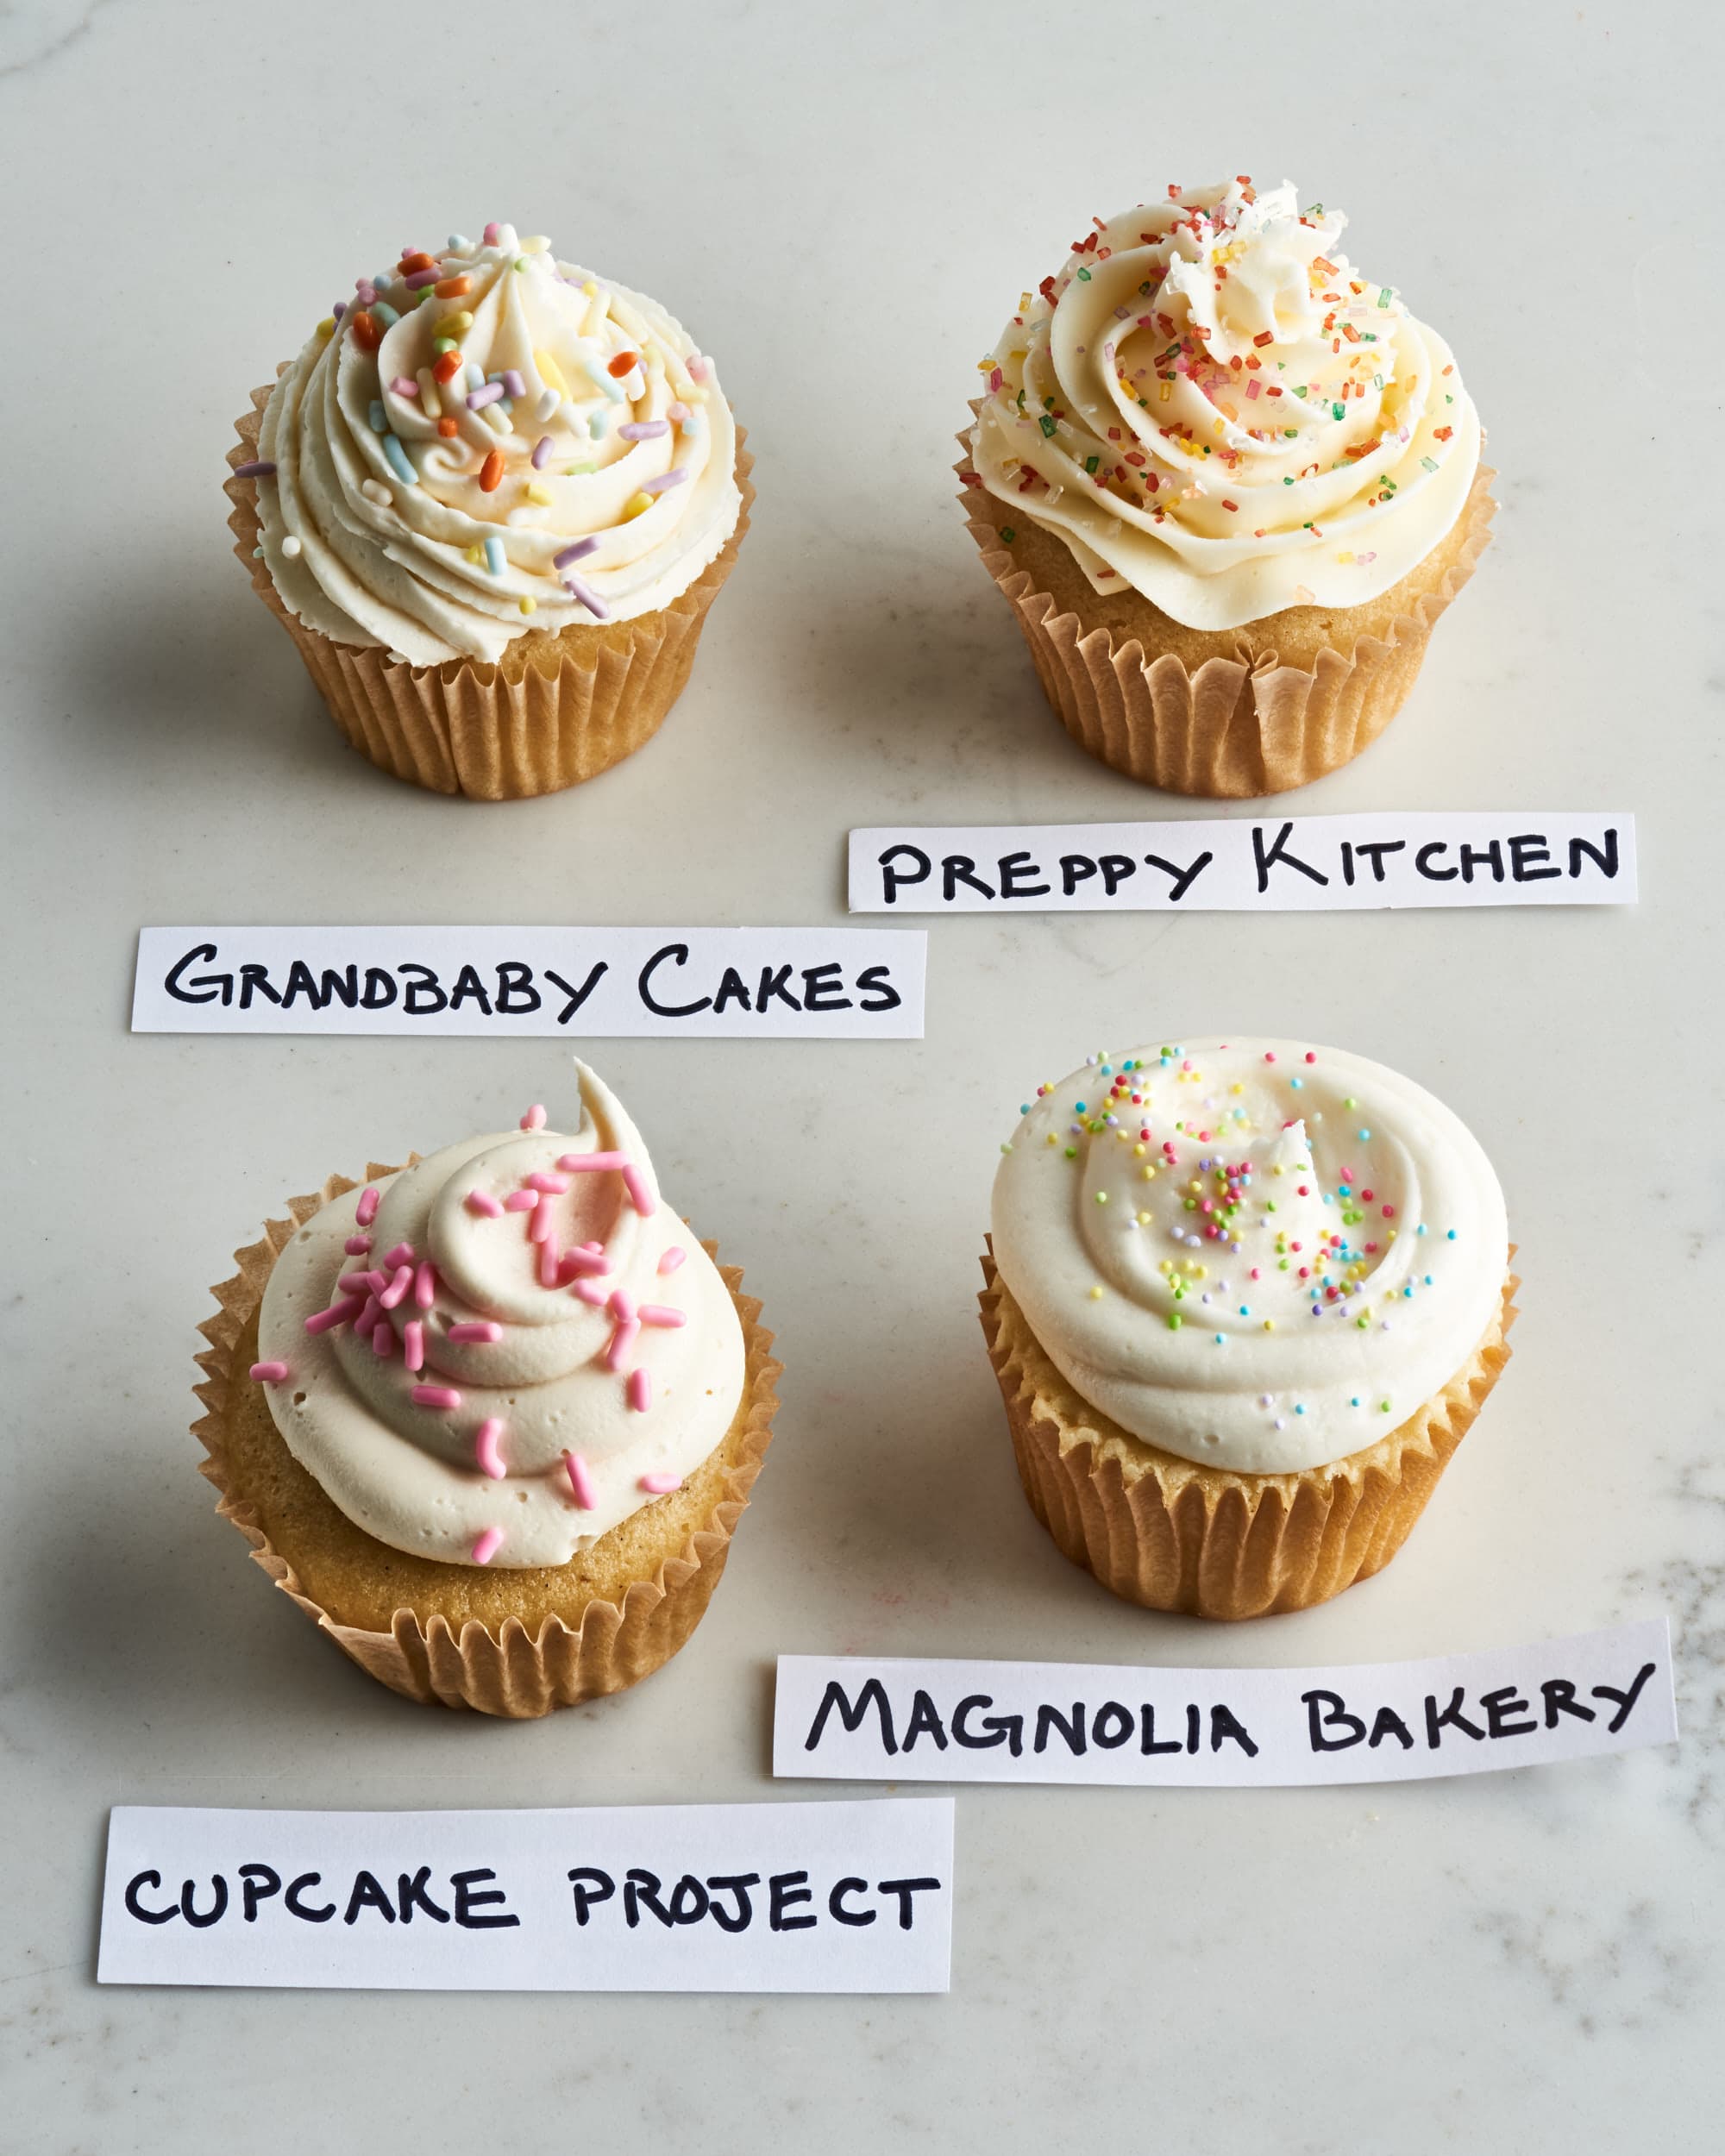 Vanilla Giant Cupcake Recipe | Baking, Recipes and Tutorials - The Pink  Whisk